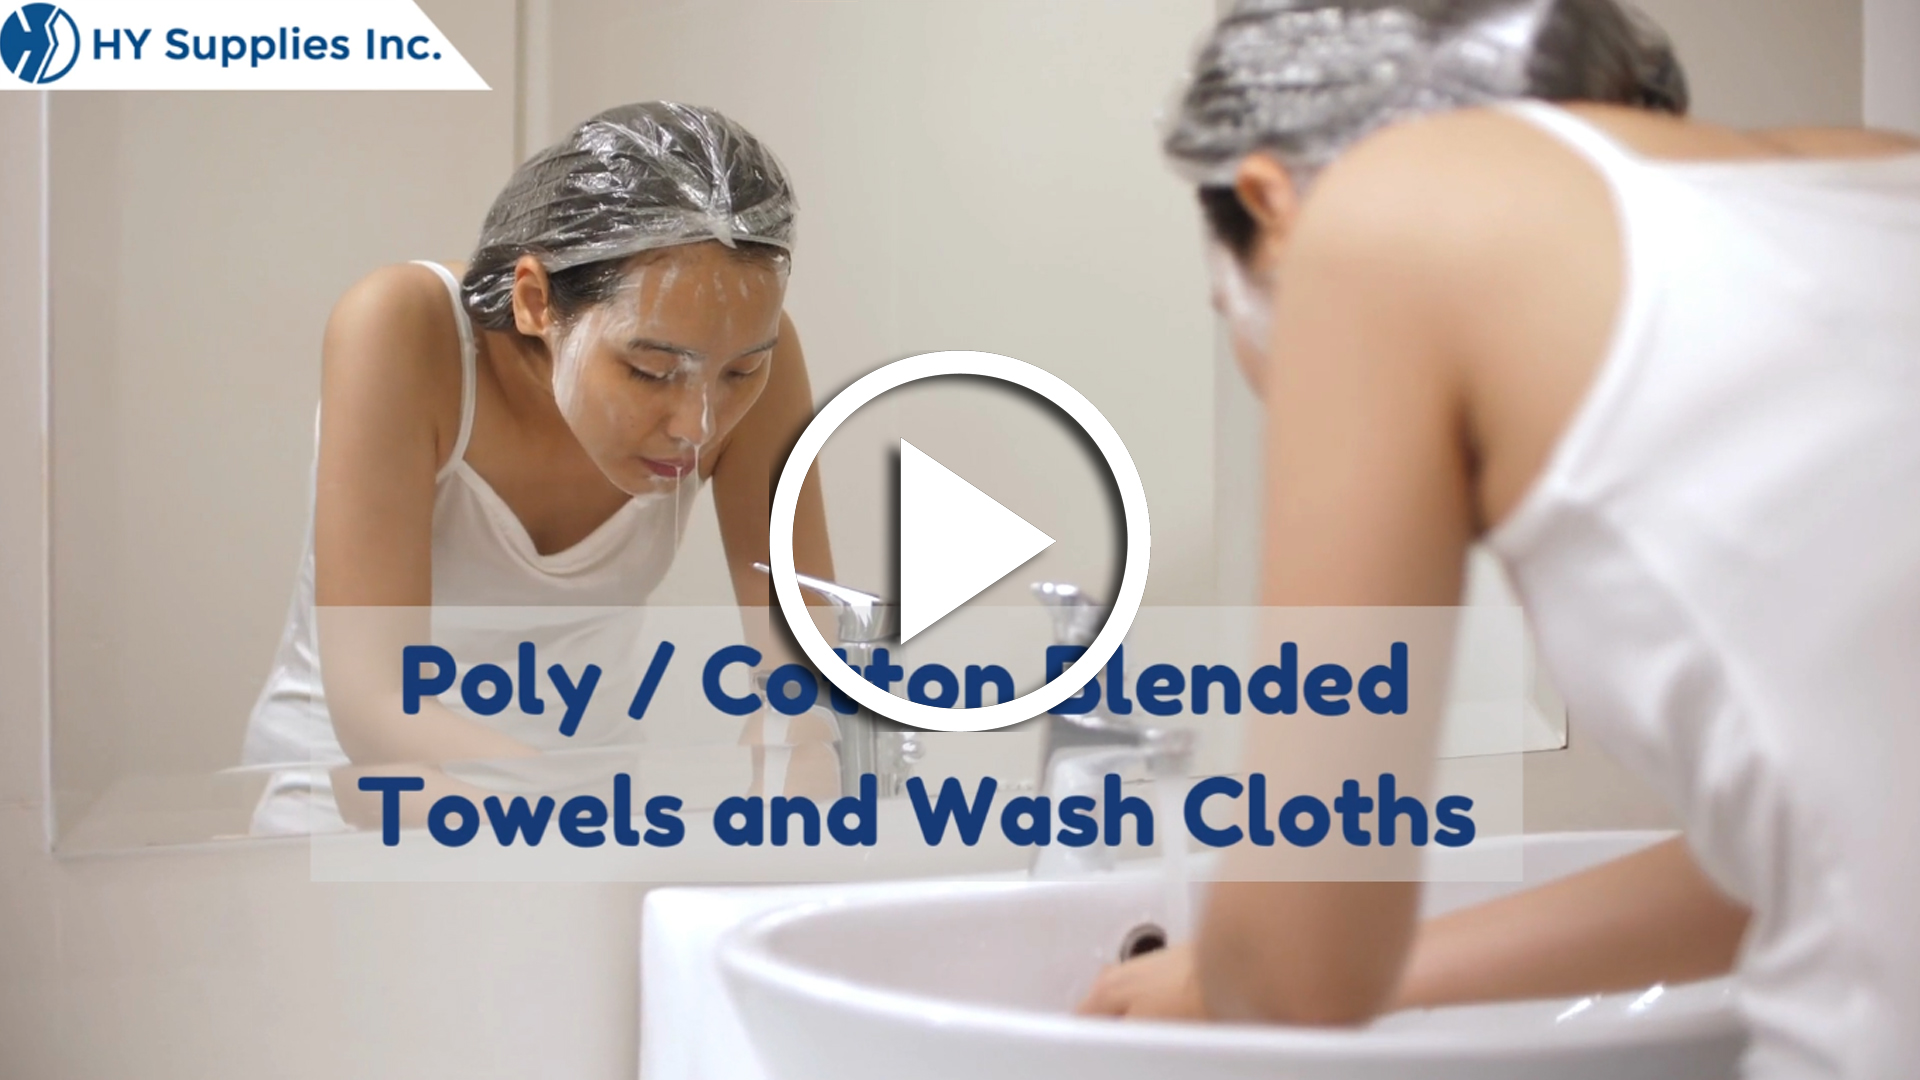 Poly / Cotton Blended Towels and Wash Cloths